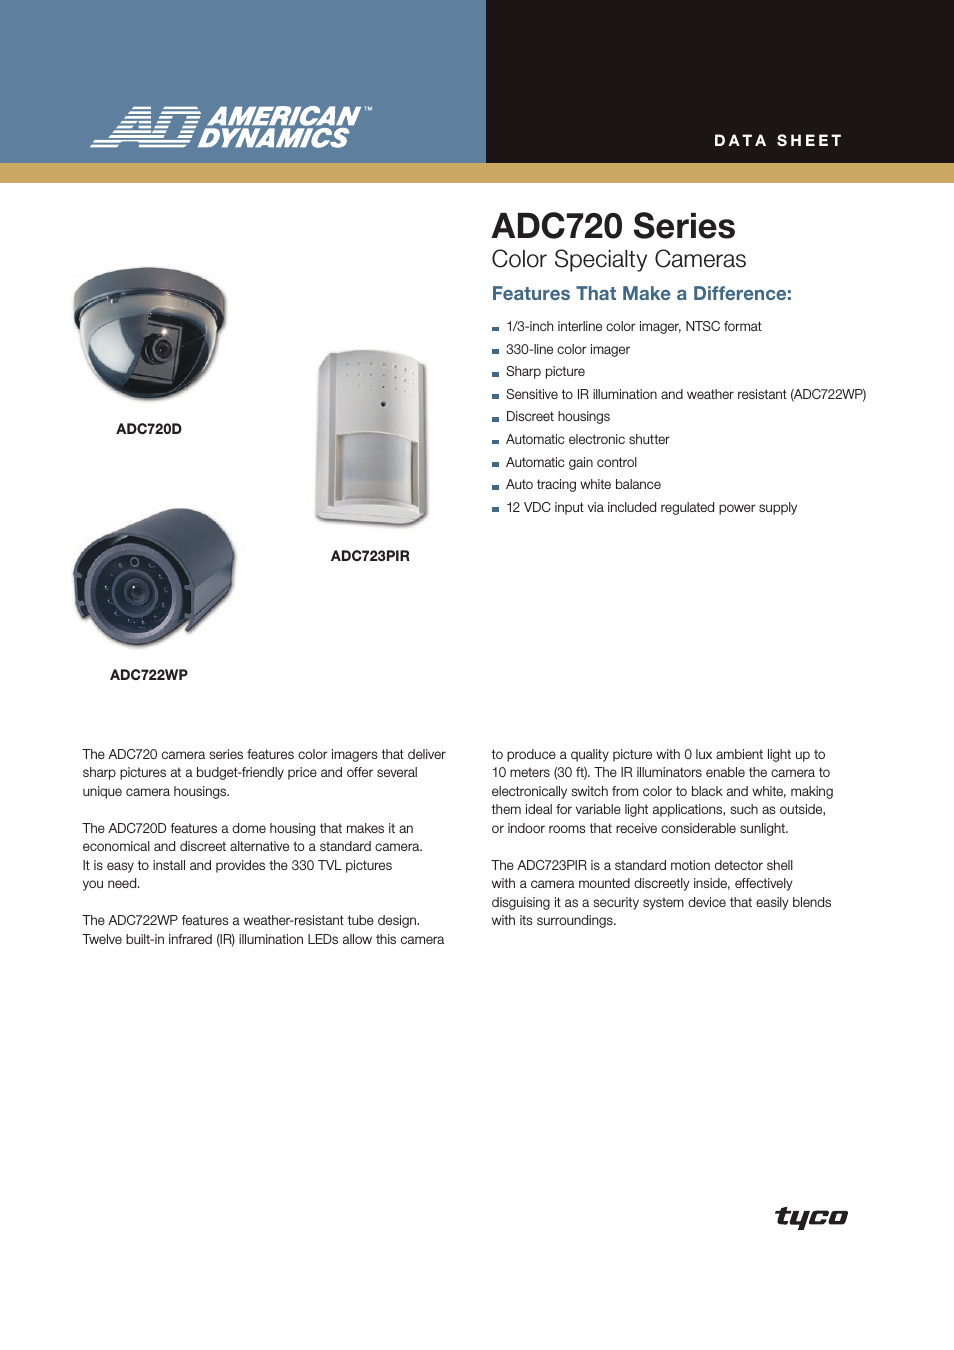 ADC720D